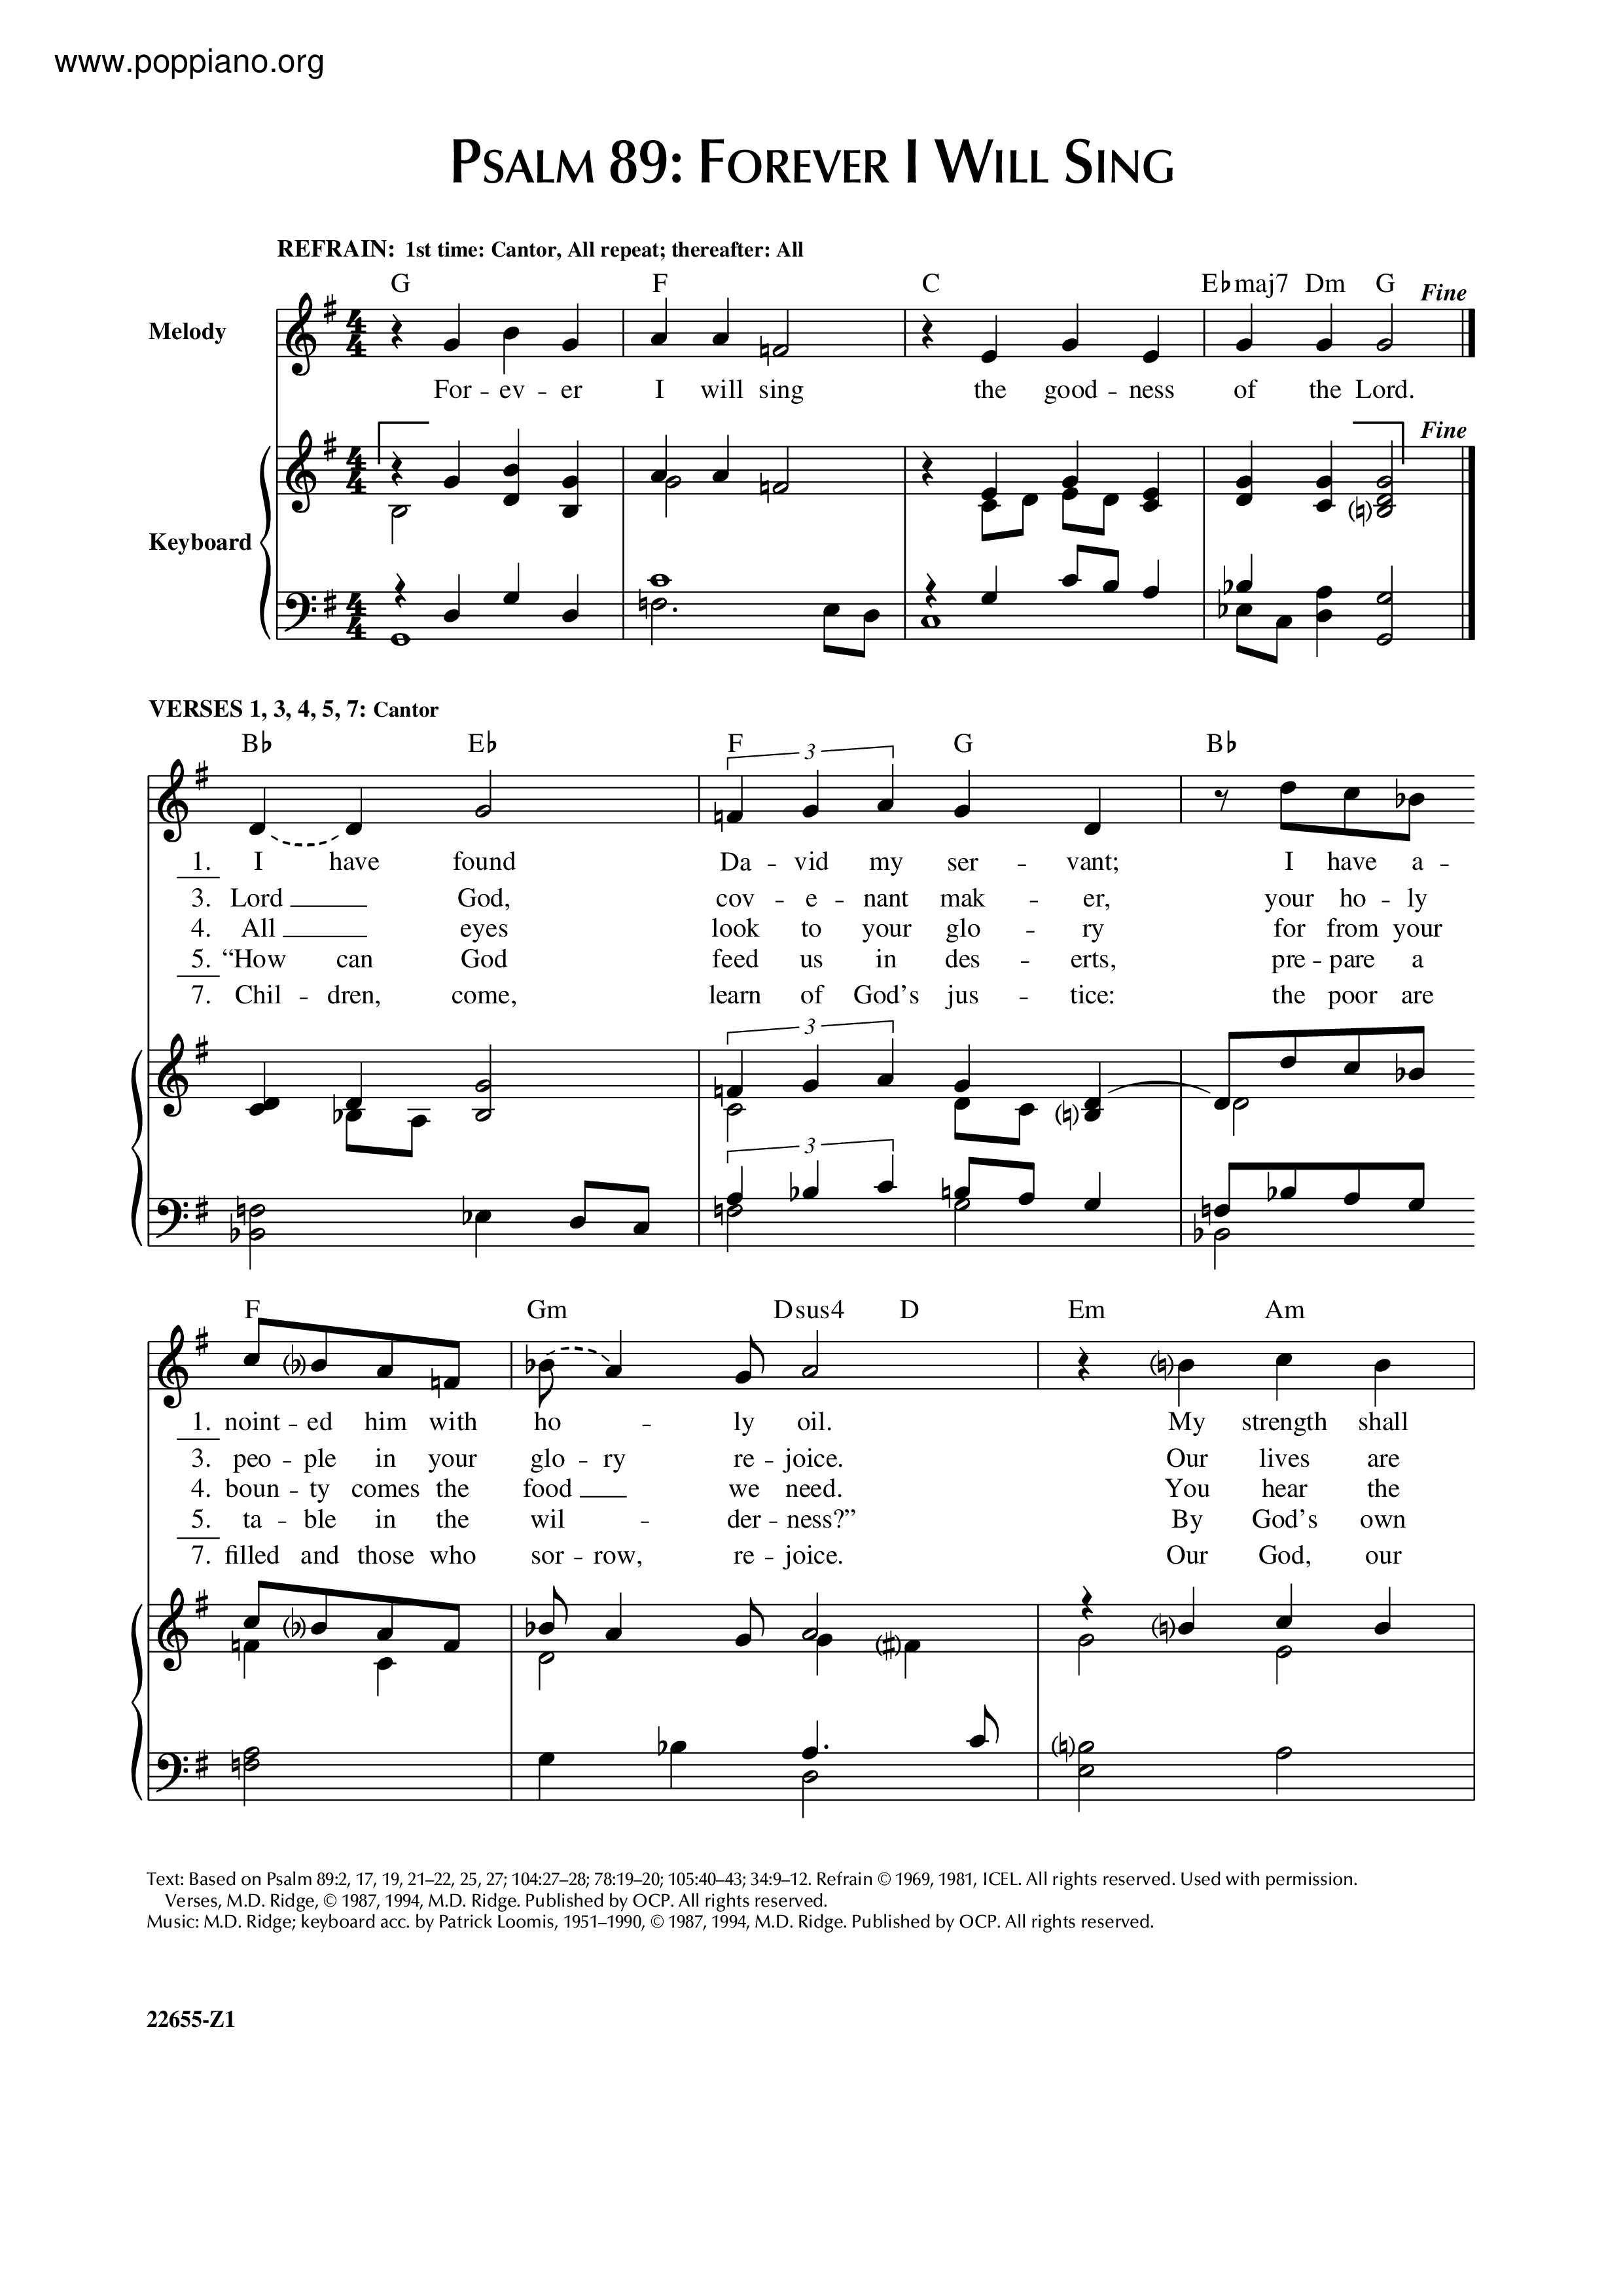 Psalm 89: Forever I Will Sing Score